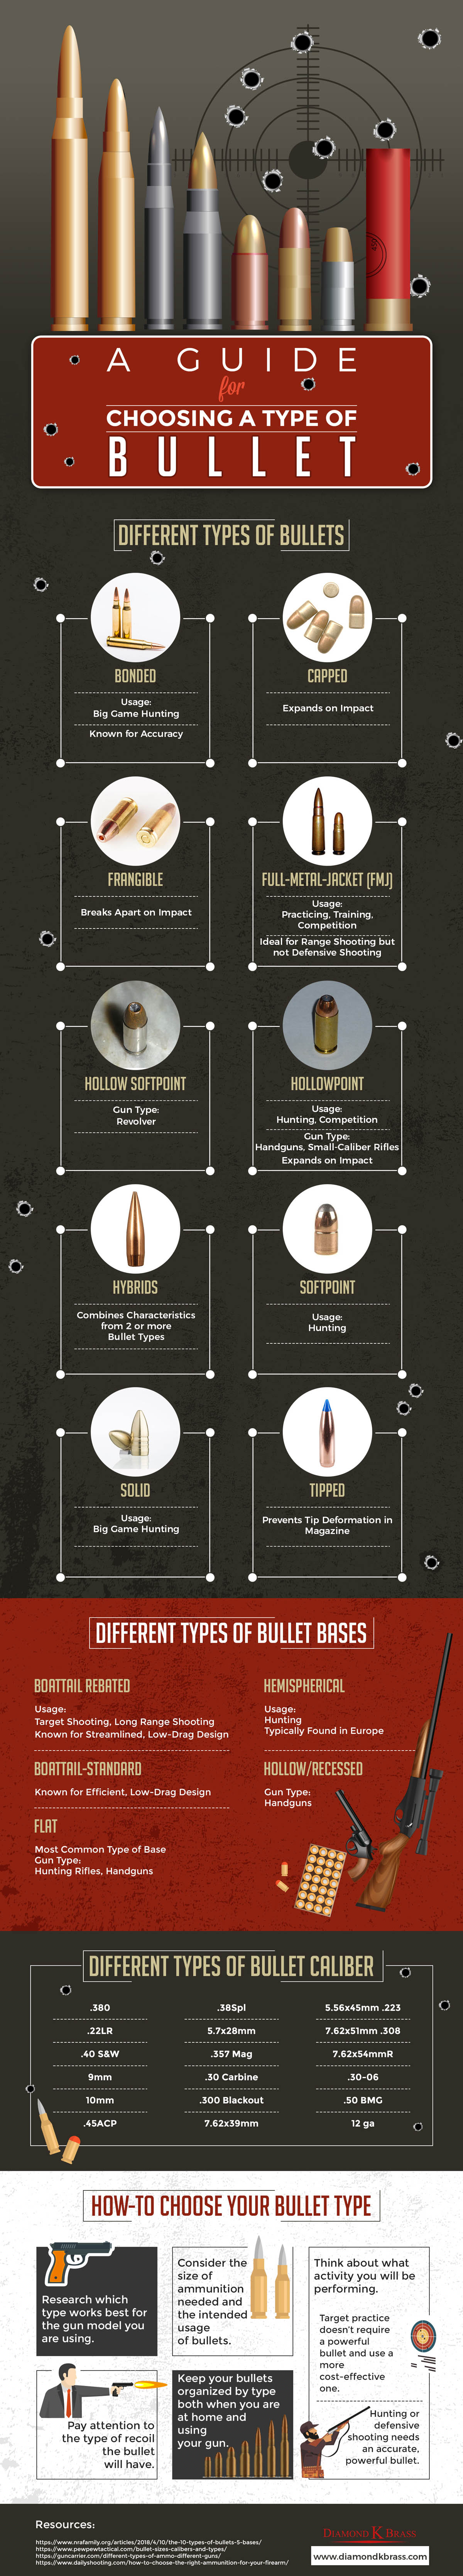 A Guide for Choosing a Type of Bullet